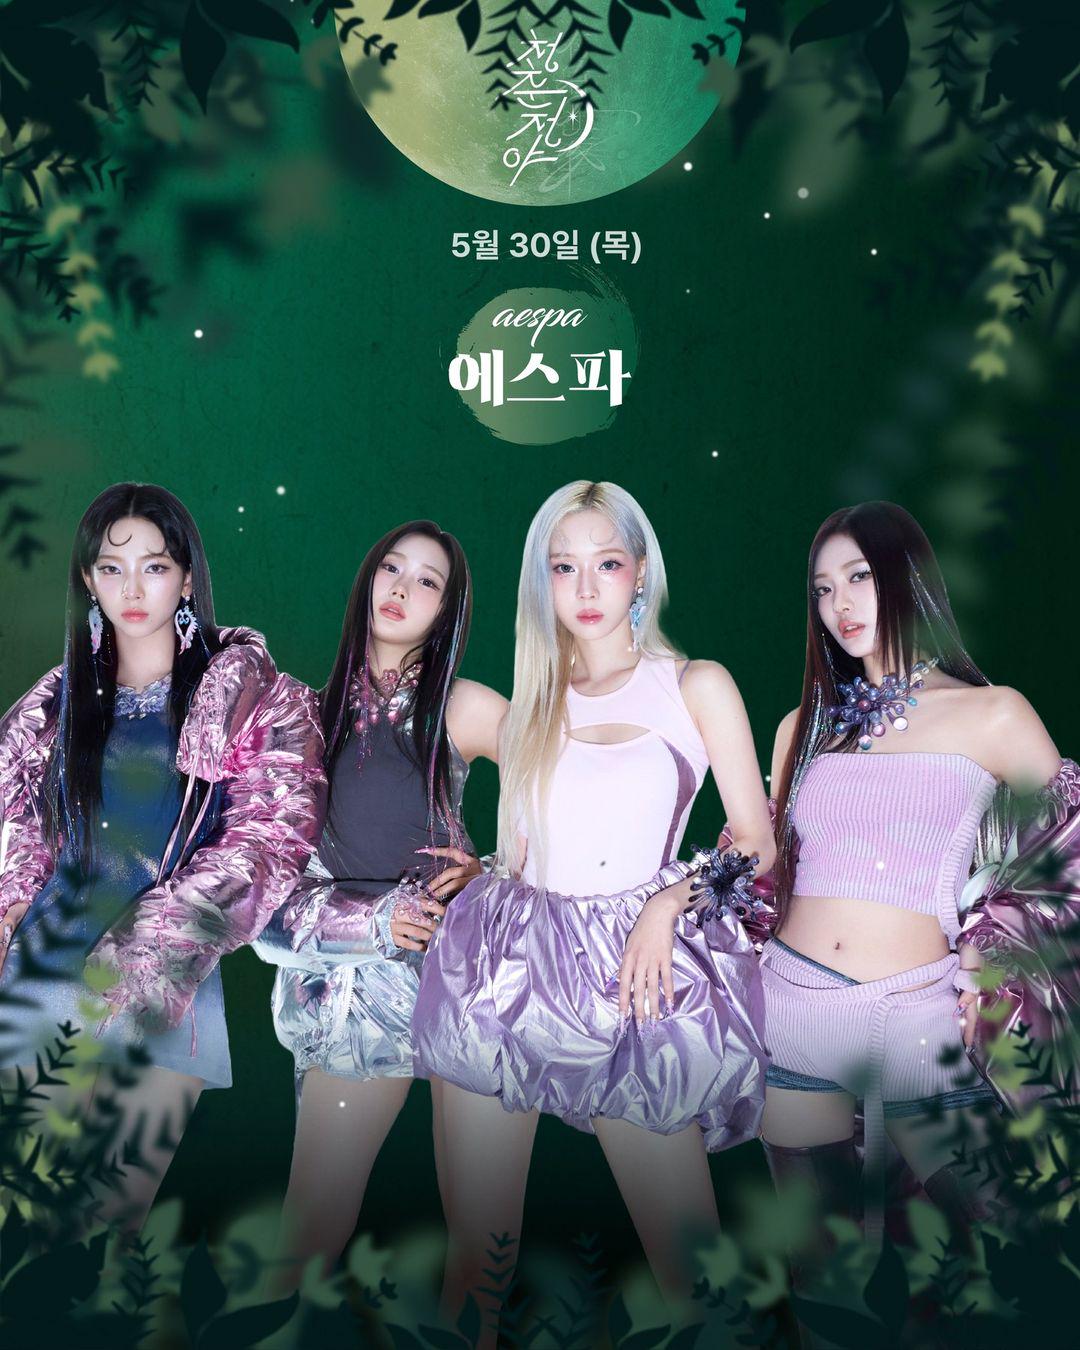 240522 aespa announced as part of the lineup for “2024 Sungkyunkwan University Festival” on May 30th